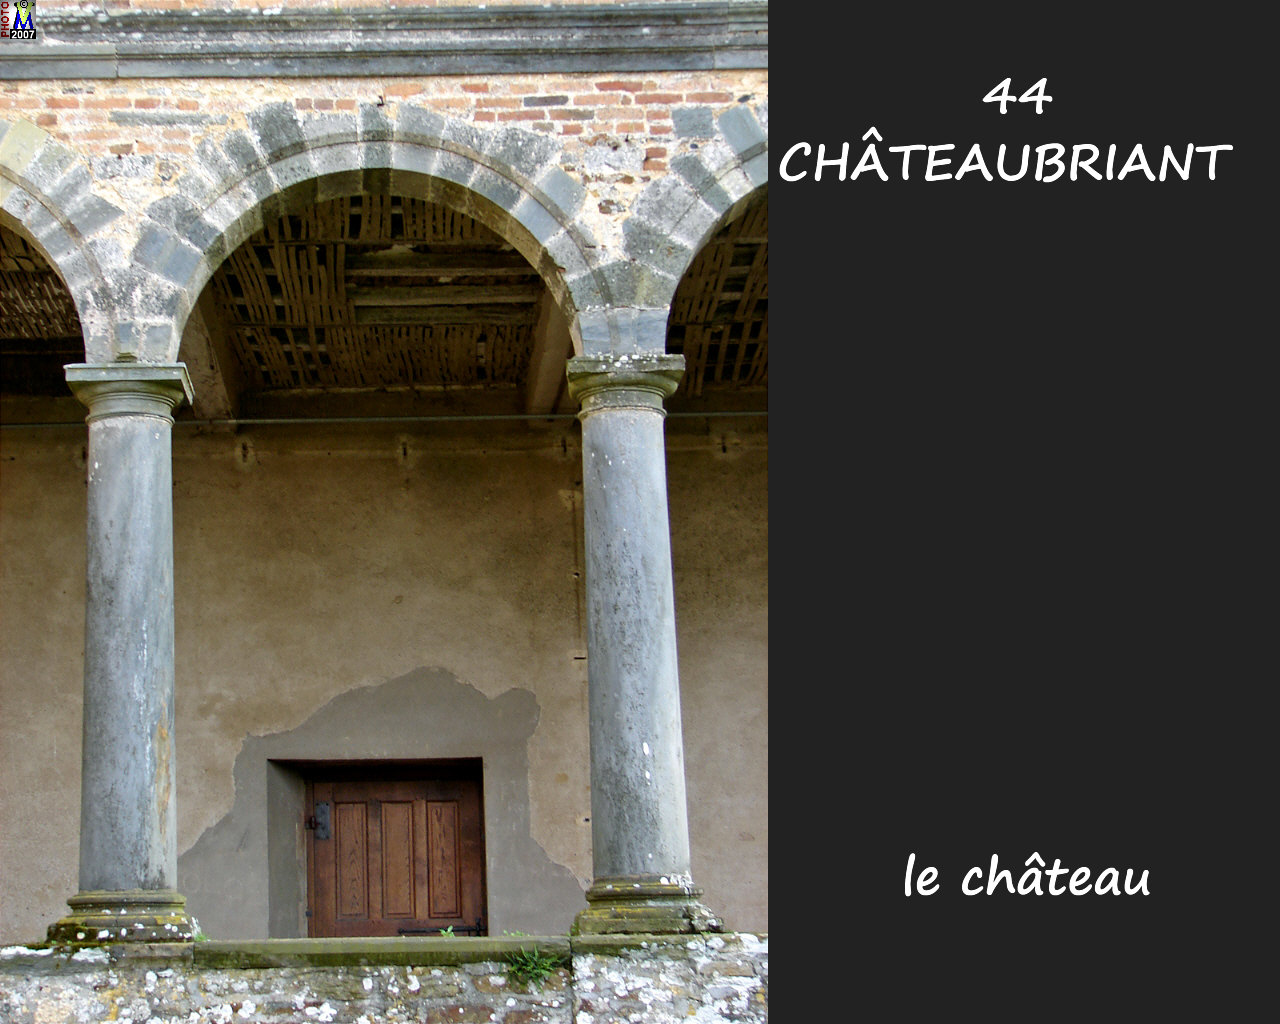 44CHATEAUBRIANT_chateau_144.jpg